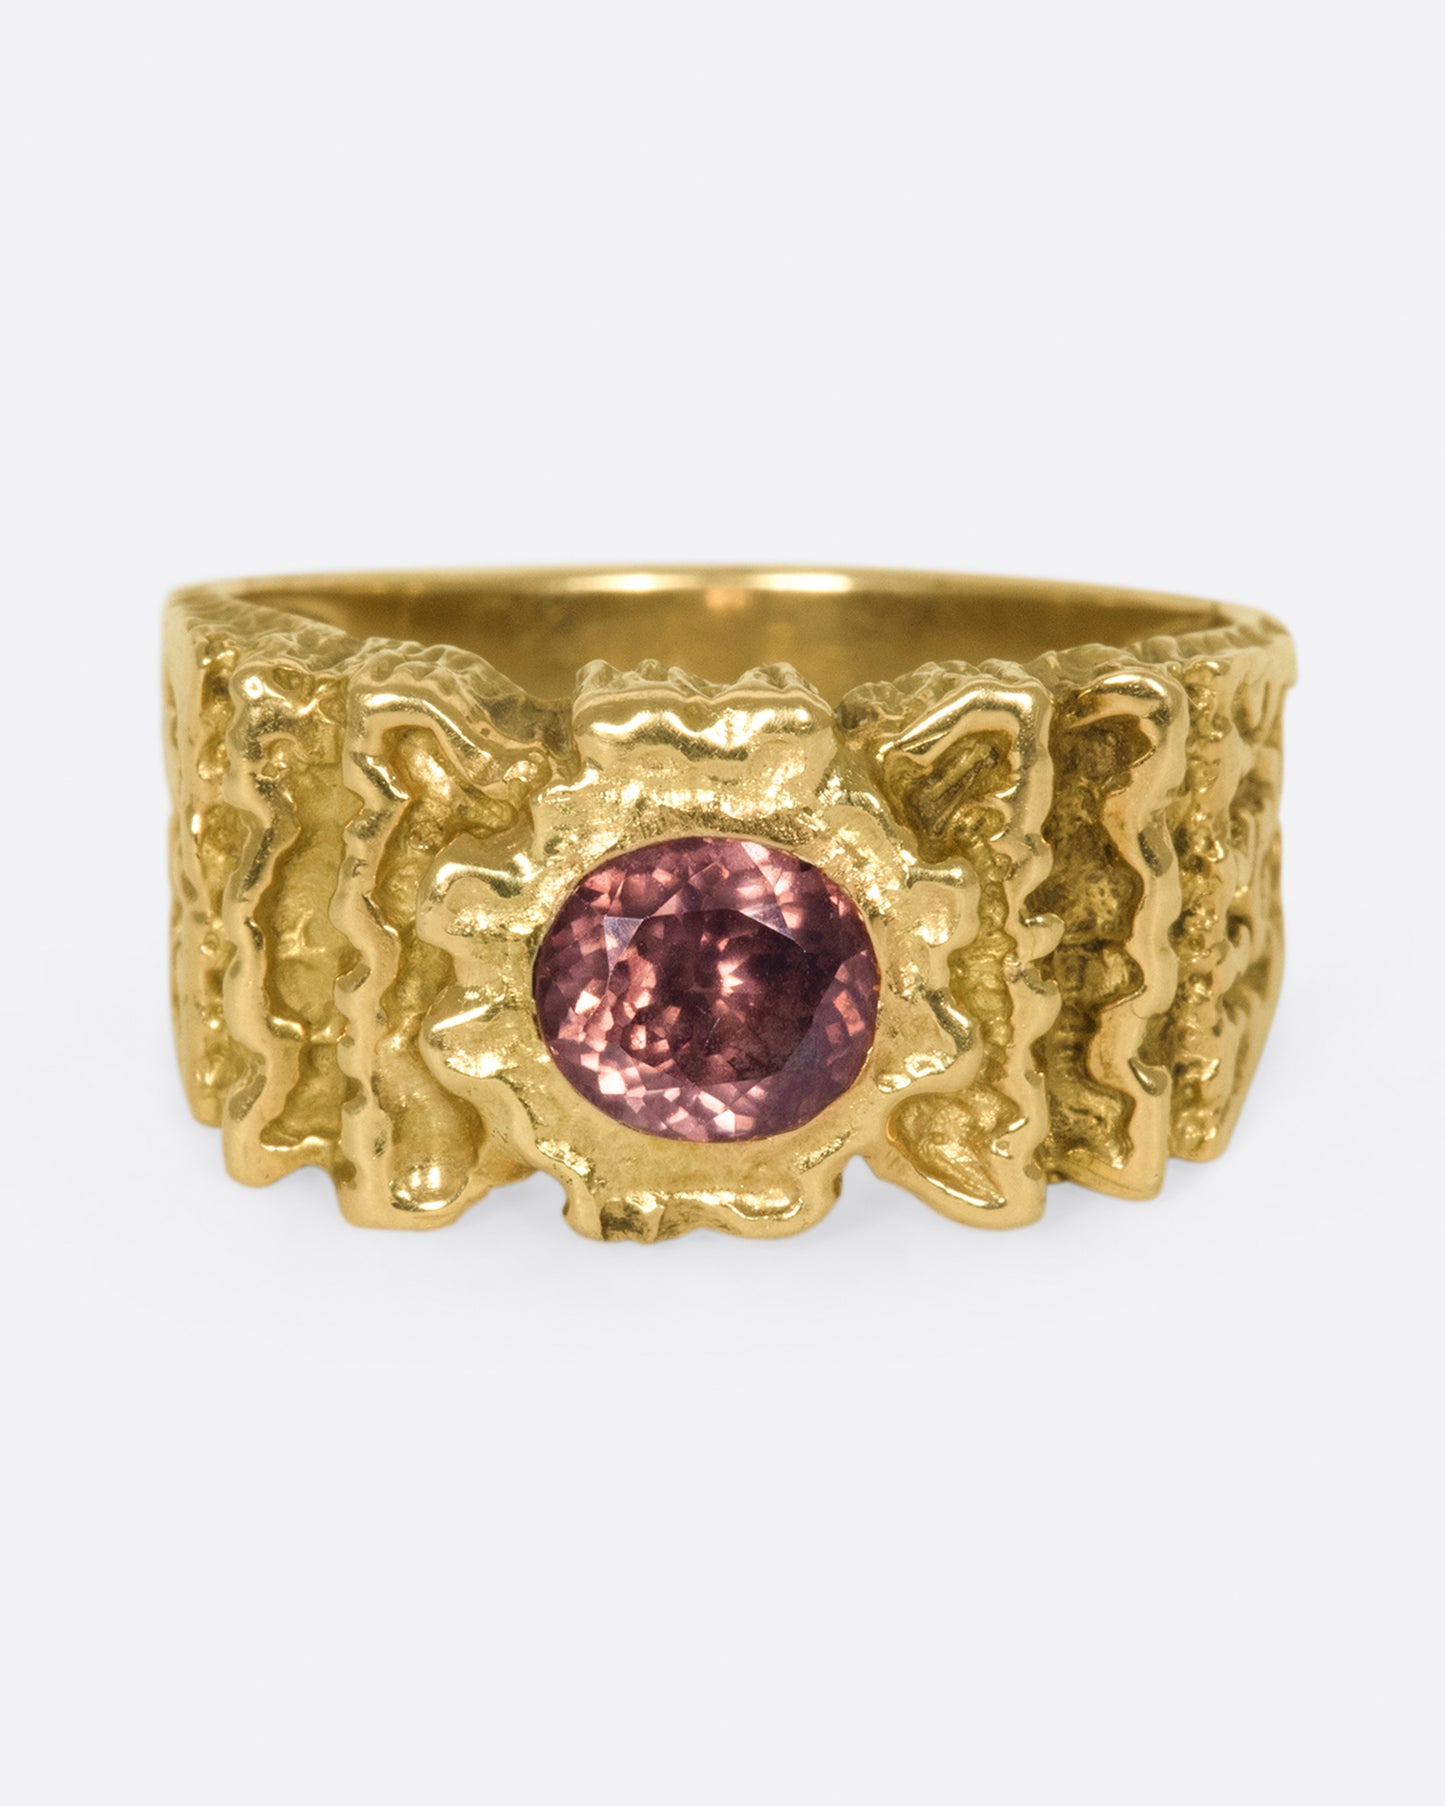 A front view of a yellow gold ring with ribbon texture and round pink spinel.